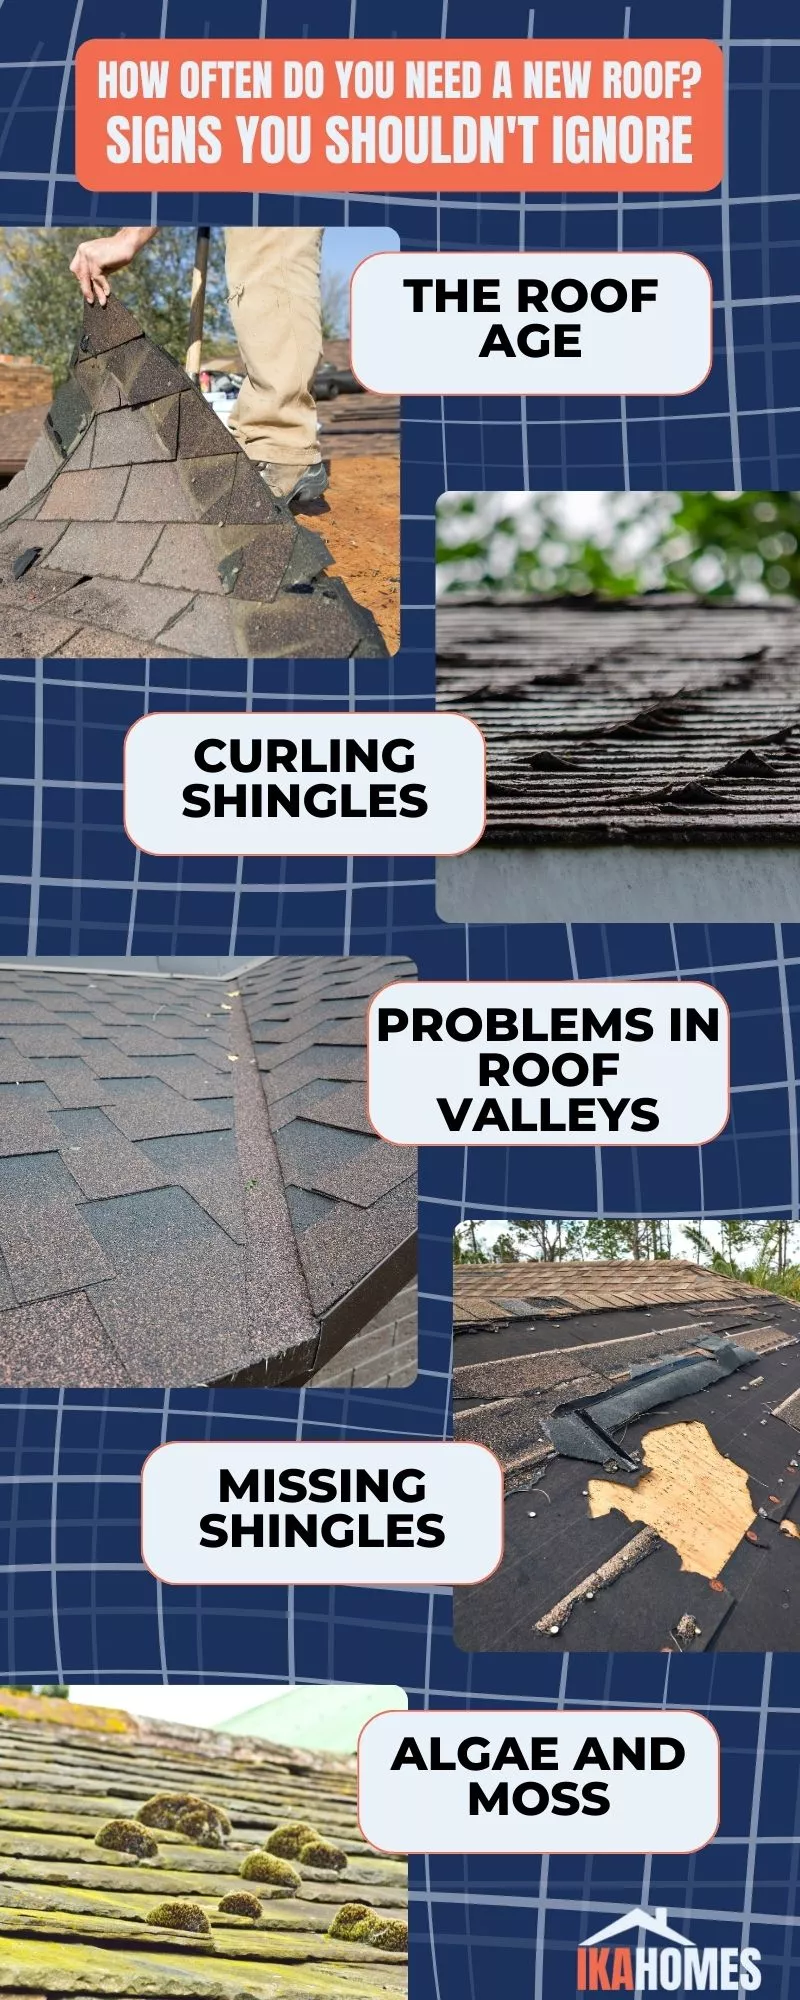 How Often Do You Need A New Roof? Signs You Shouldn't Ignore